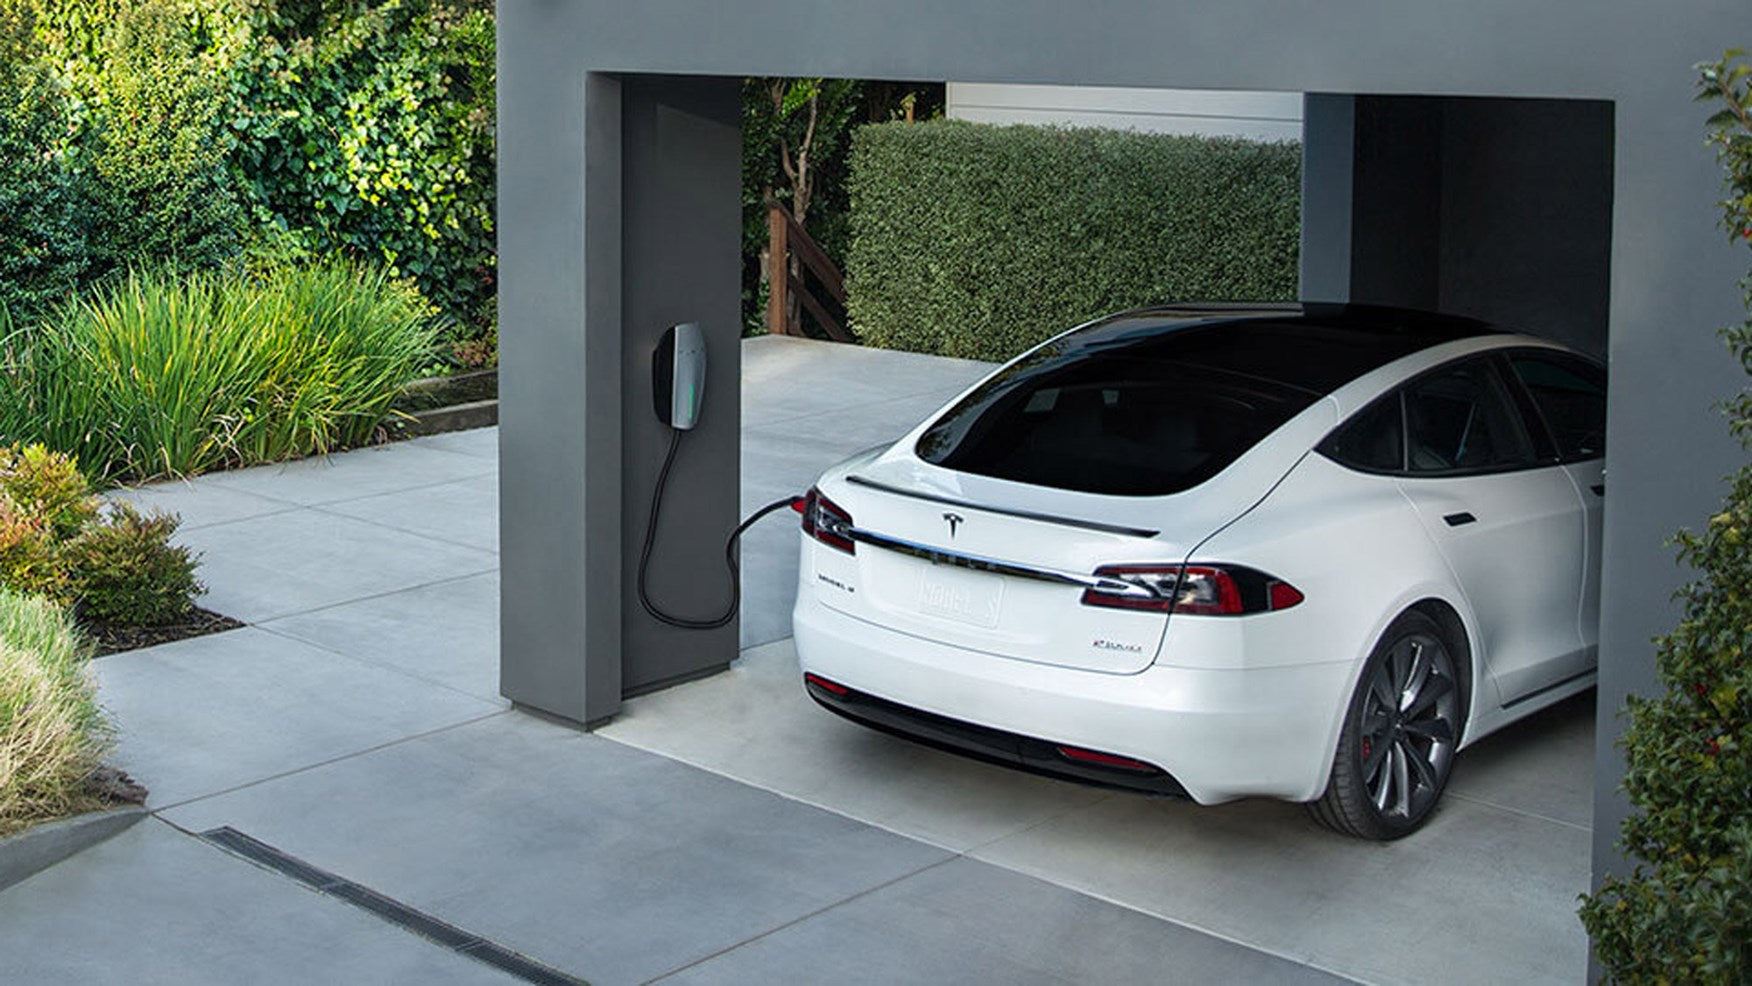 Tesla's 1 Million-Mile Battery May Increase Earnings With Virtual Power Plants